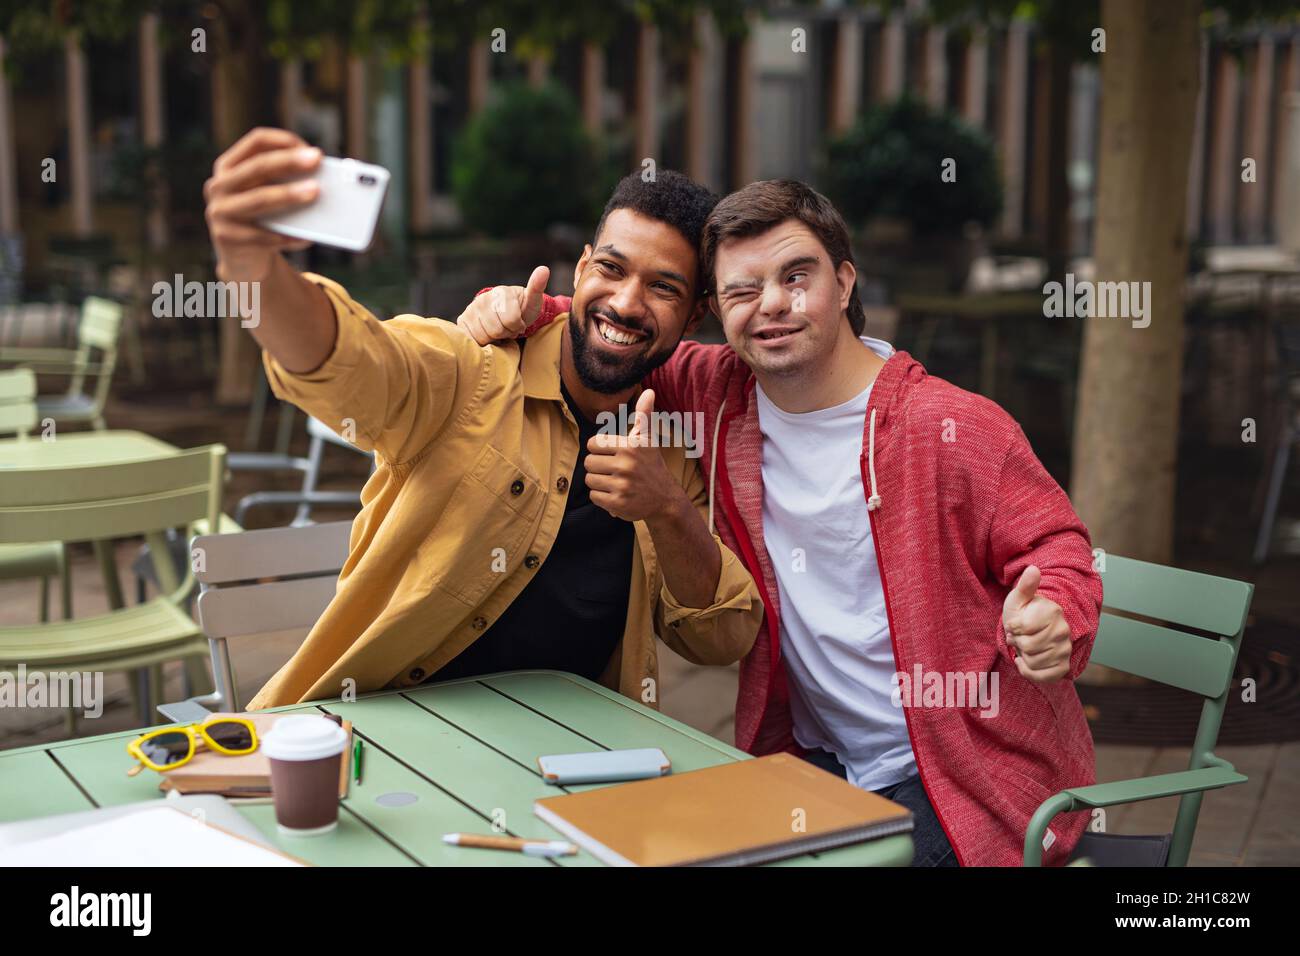 Young man with Down syndrome and his mentoring friend sitting and taking selfie outdoors in cafe Stock Photo